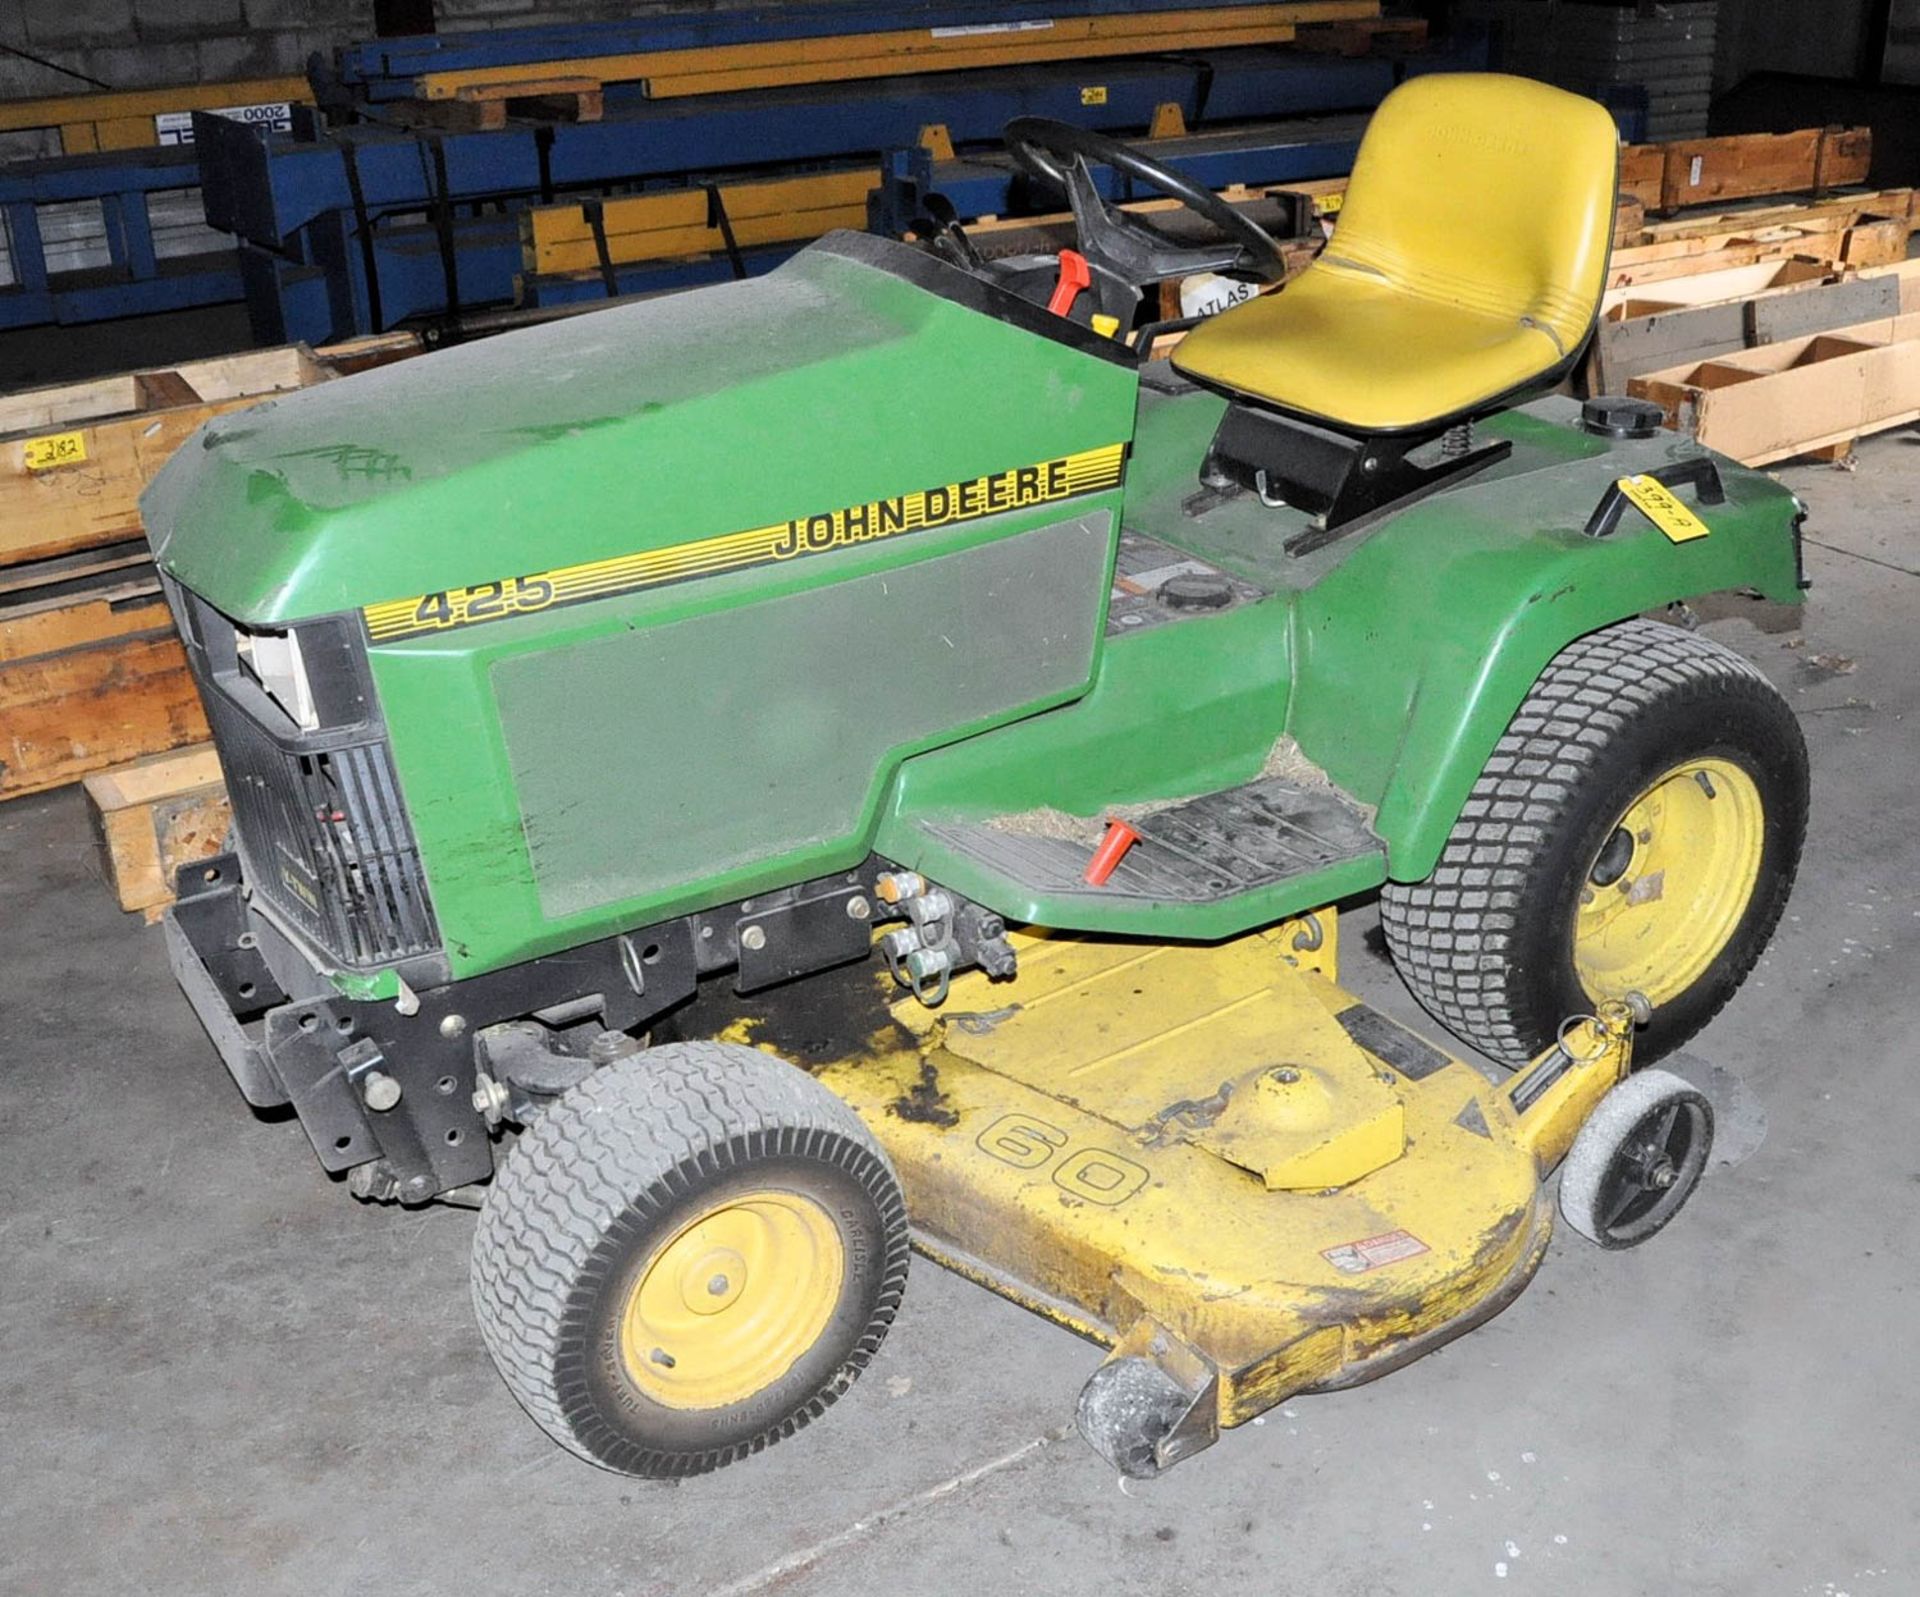 JOHN DEERE 425, GAS POWERED LAWN TRACTOR WITH 60" MOWING DECK, (OUTBUILDING-TIFFIN)